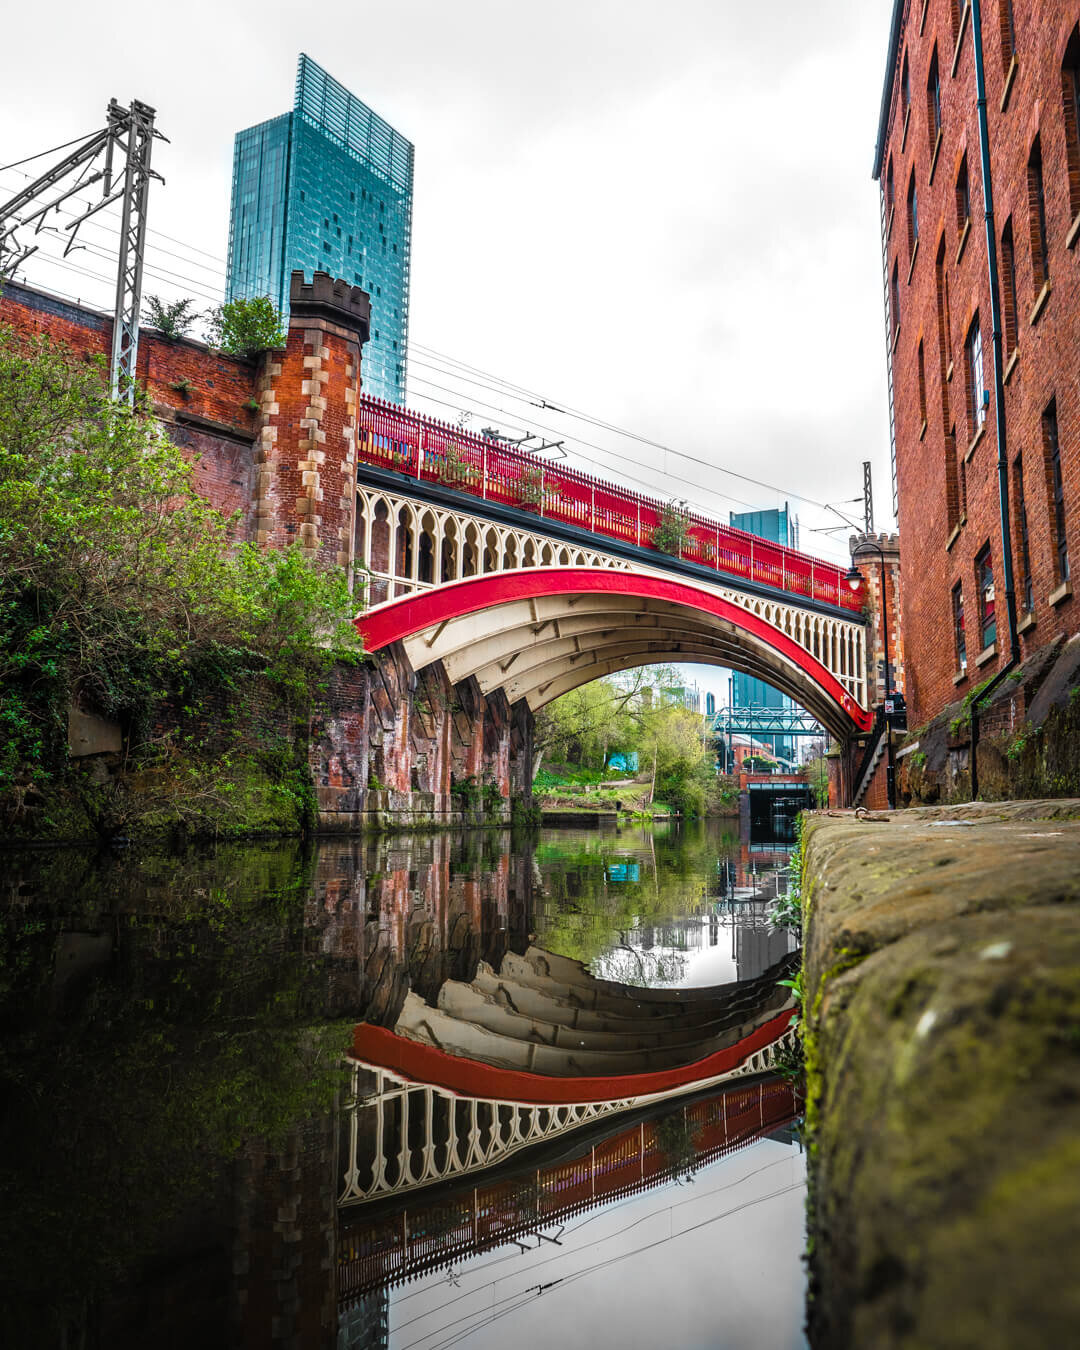 Red Castlefield bridge in Manchester reflected in the canal with the Hilton Hotel in the distance